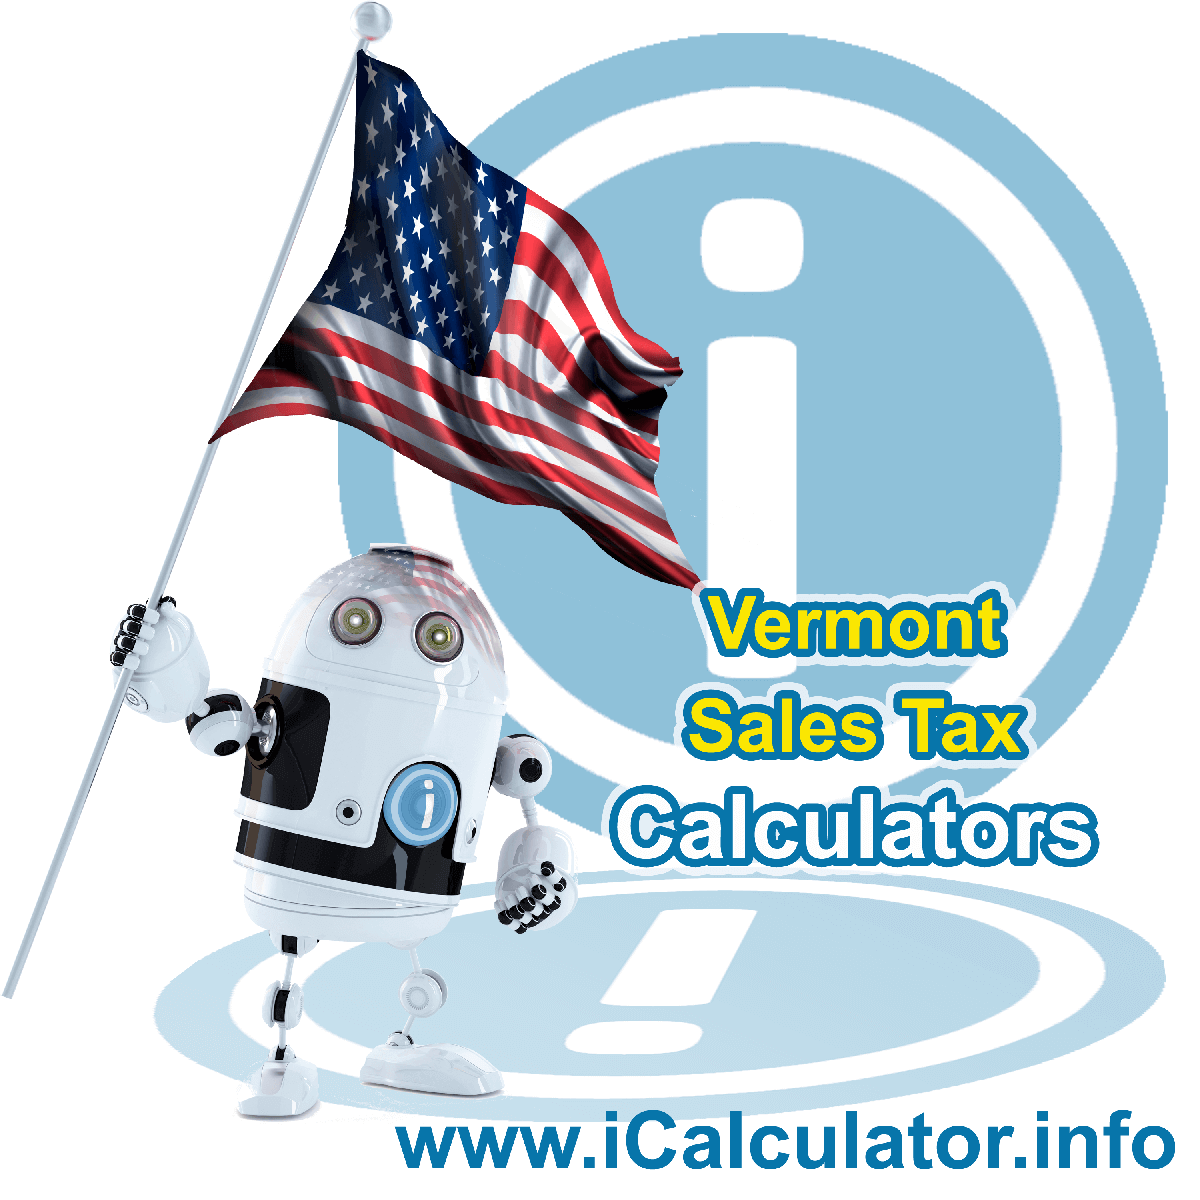 Vermont Sales Tax Comparison Calculator: This image illustrates a calculator robot comparing sales tax in Vermont manually using the Vermont Sales Tax Formula. You can use this information to compare Sales Tax manually or use the Vermont Sales Tax Comparison Calculator to calculate and compare Vermont sales tax online.